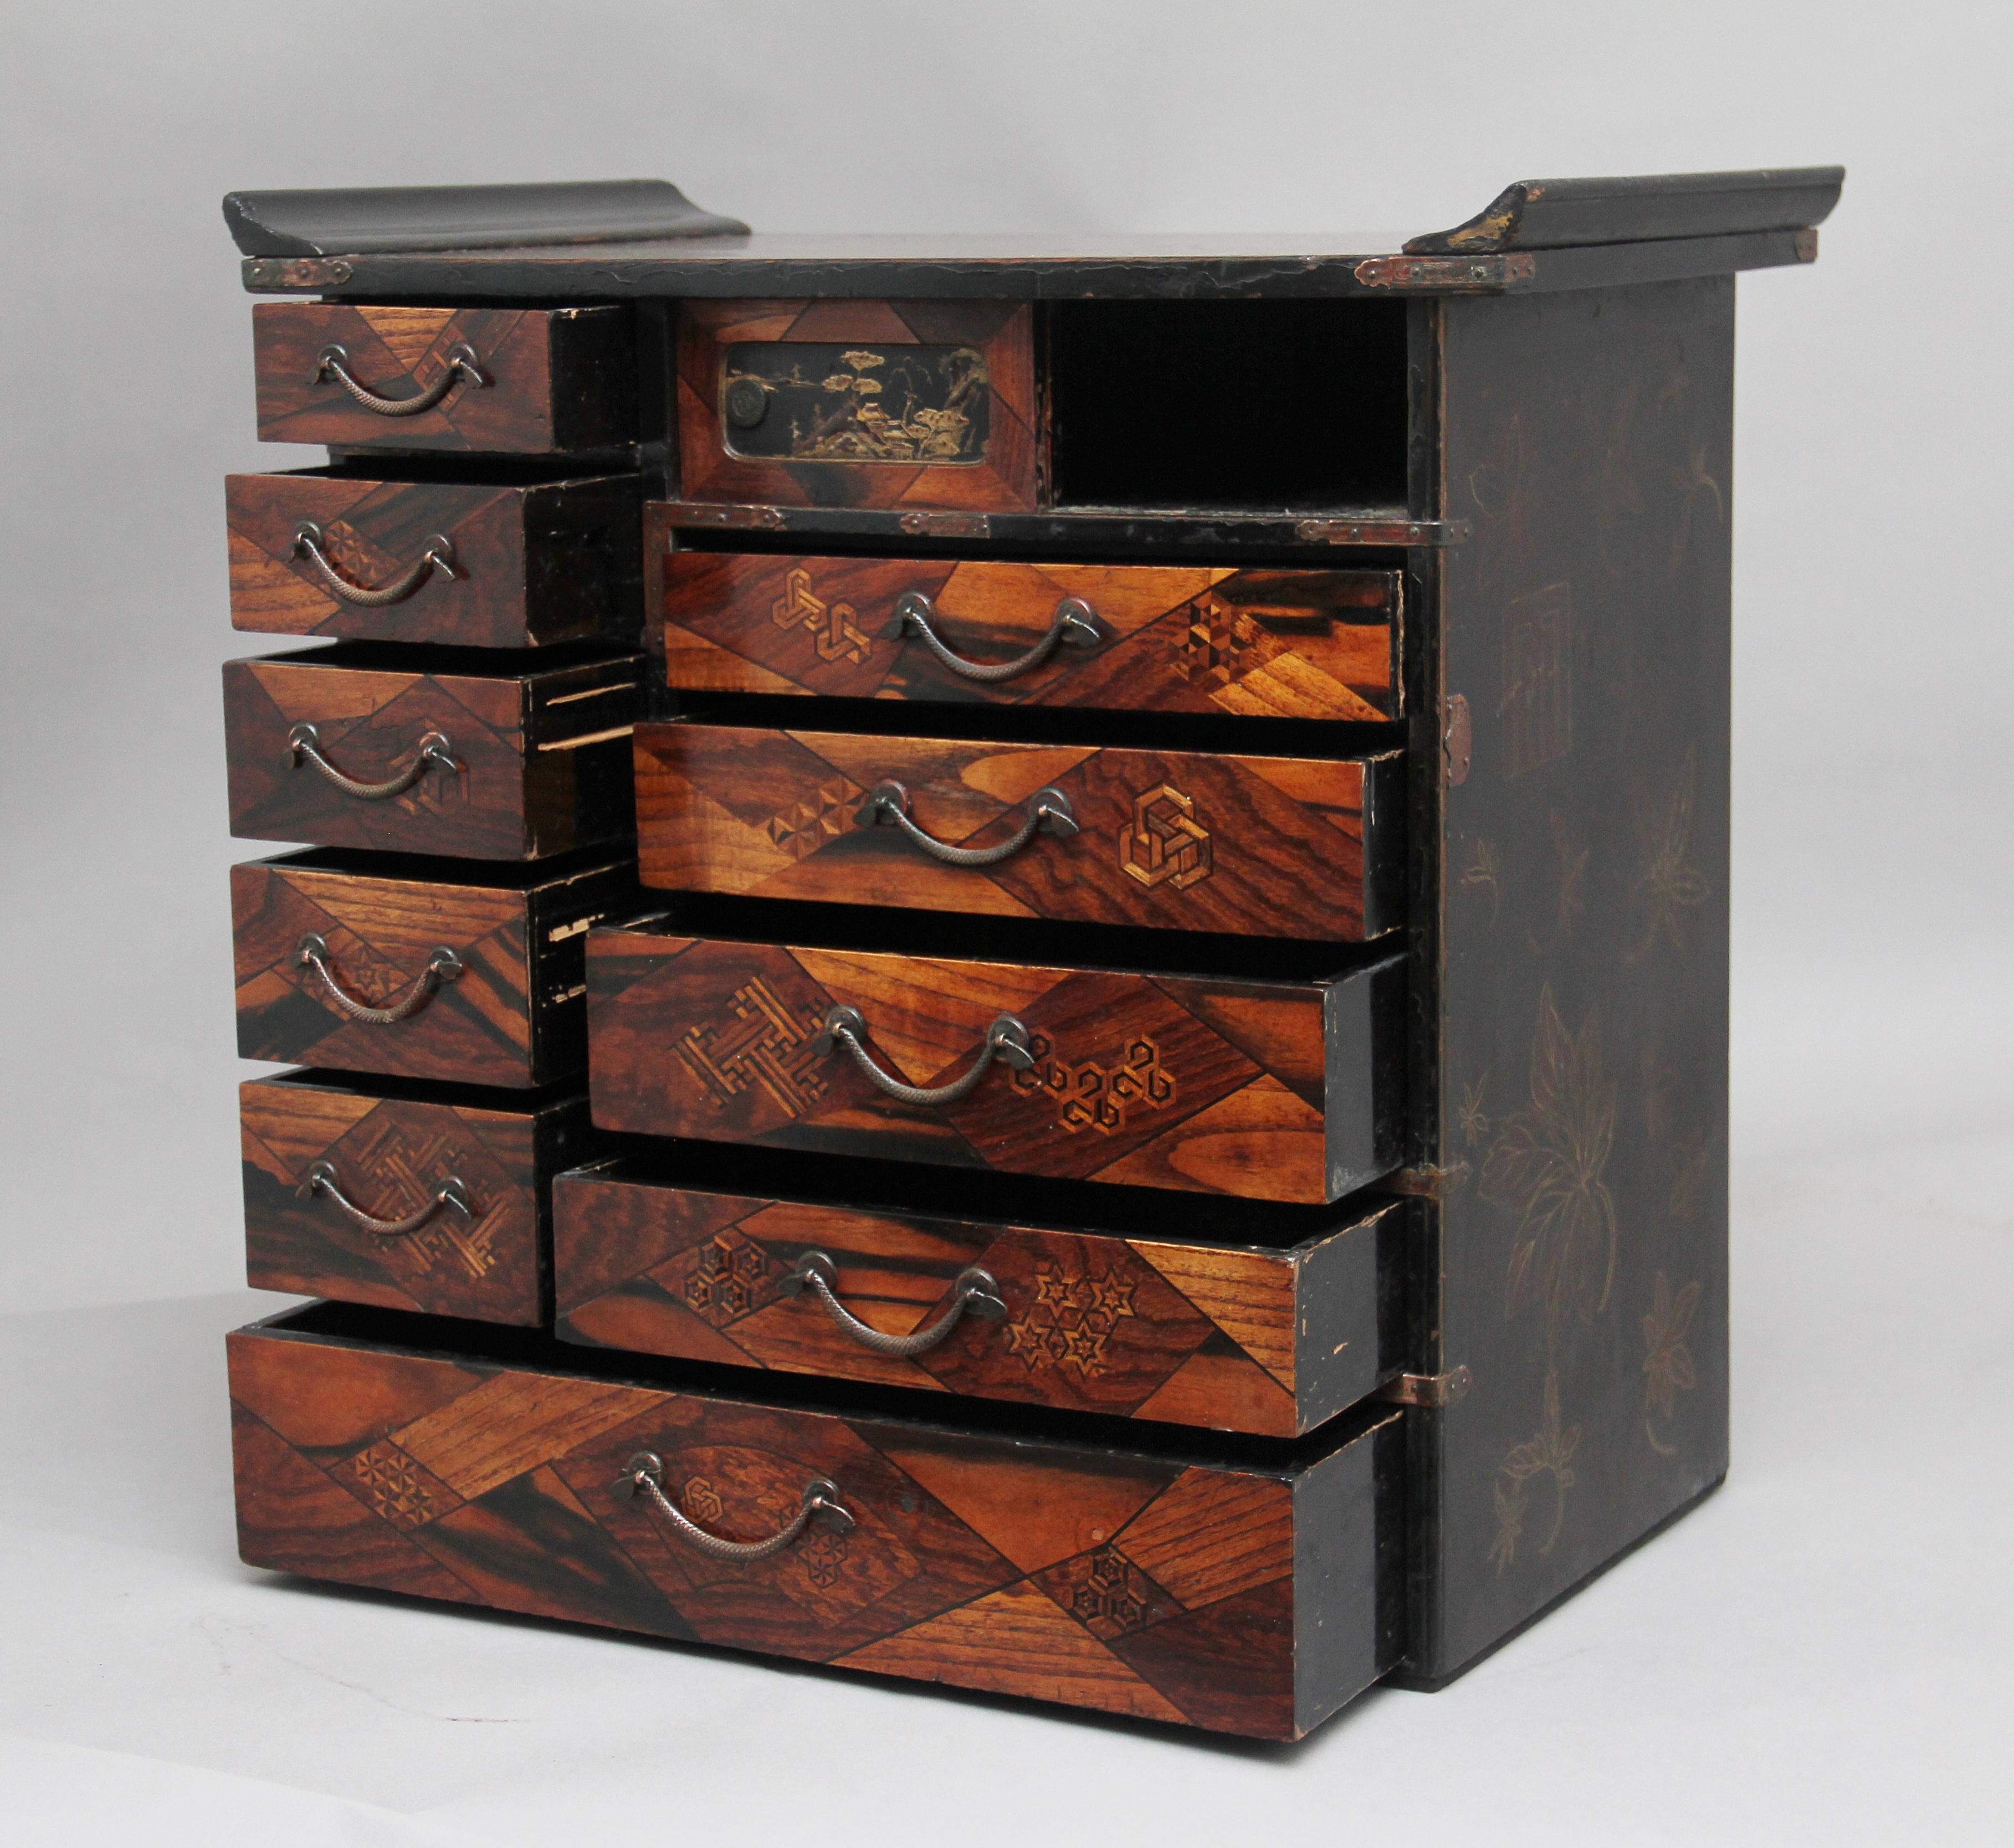 19th century Japanese parquetry and lacquered cabinet from the Meiji period, the top, sides and back lacquered with floral decoration, the front of the cabinet consisting of ten various size drawers, the parquetry on the drawer fronts is